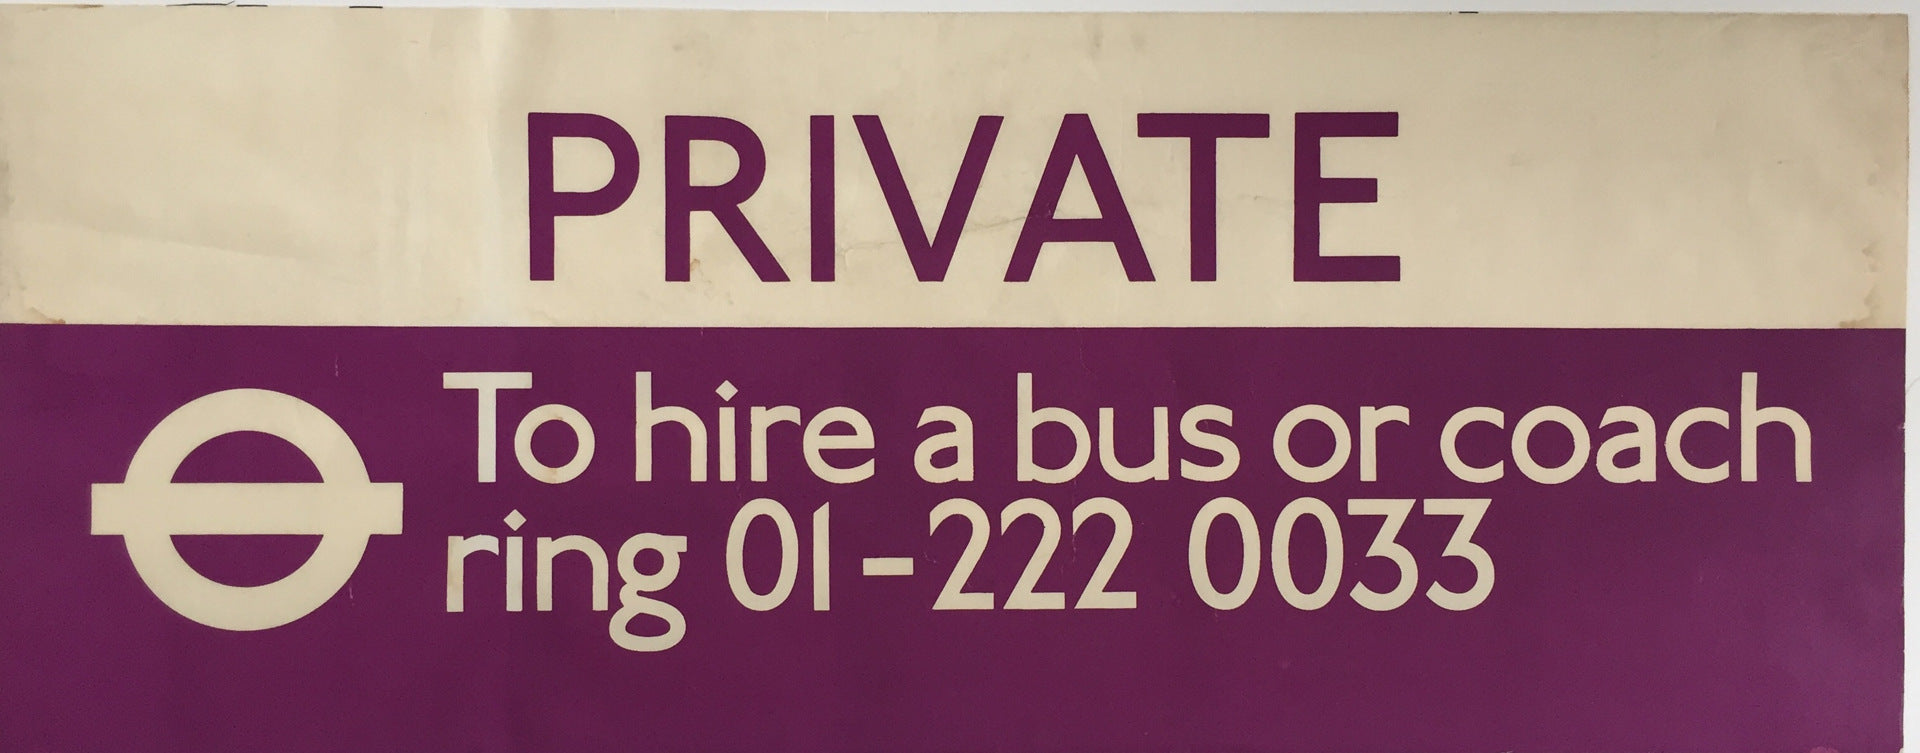 Private Bus Blind